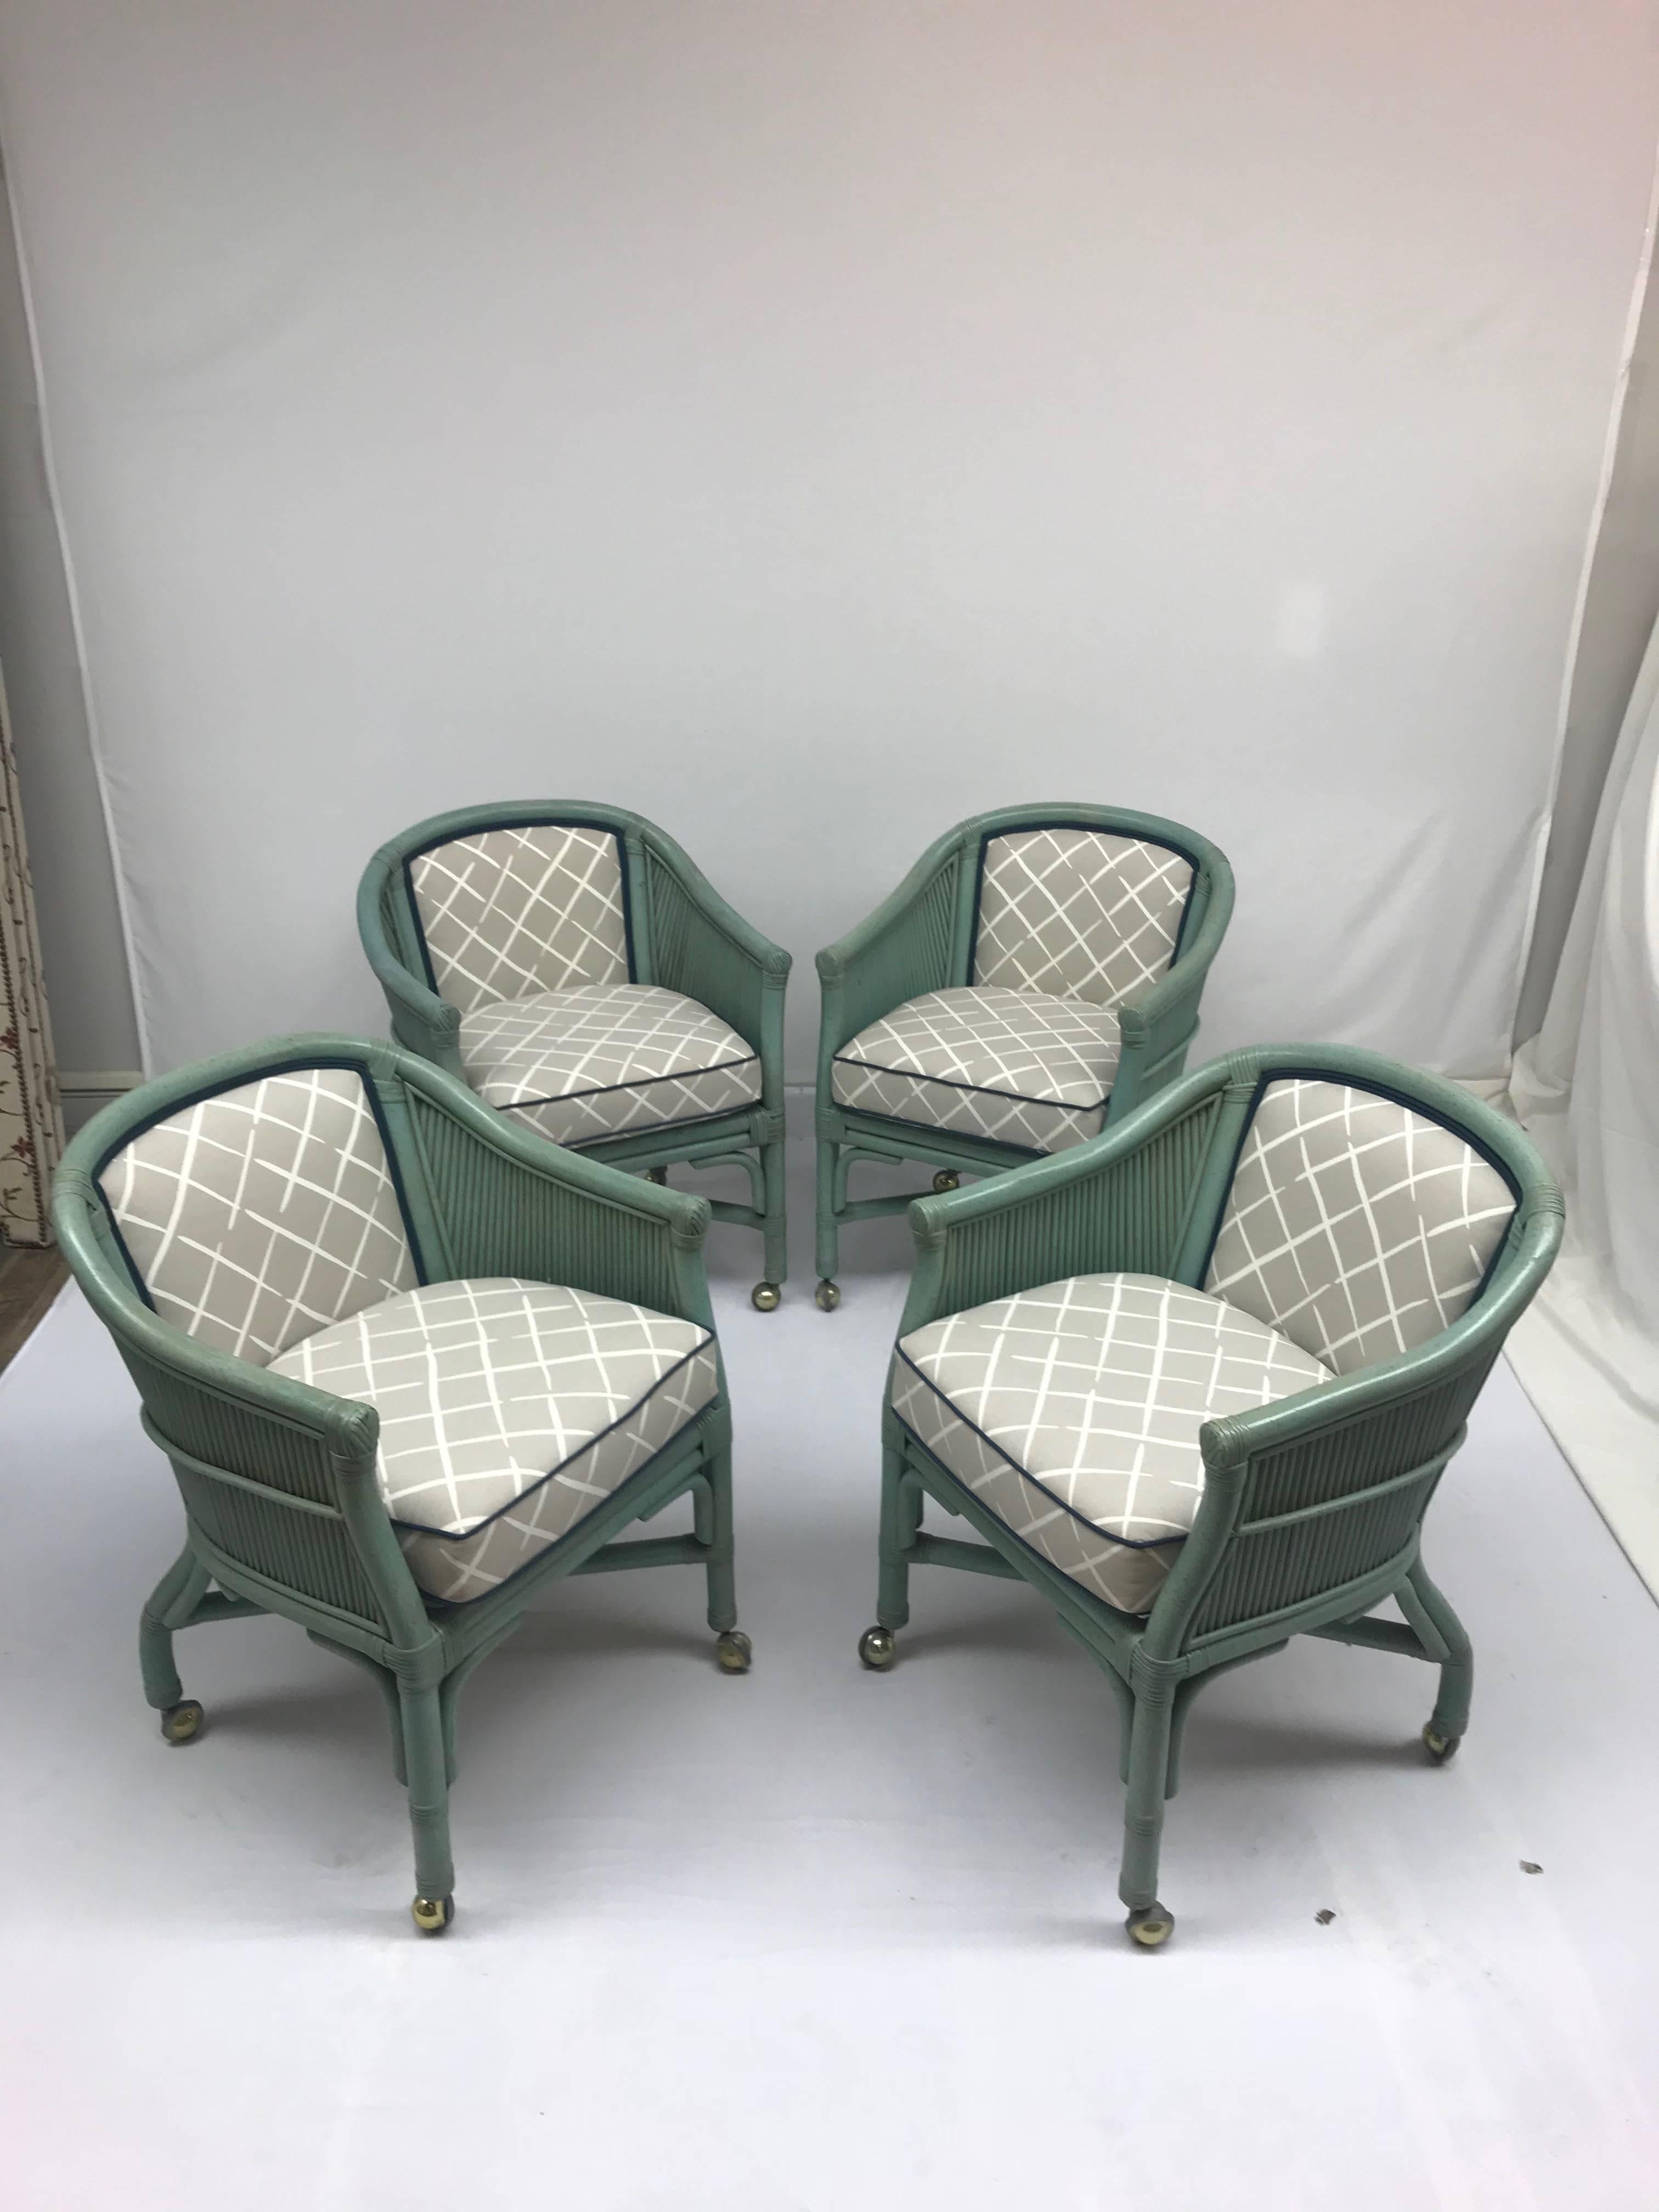 Vintage Seafoam Blue Rattan Chairs With Casters - Set of 4 For Sale 8